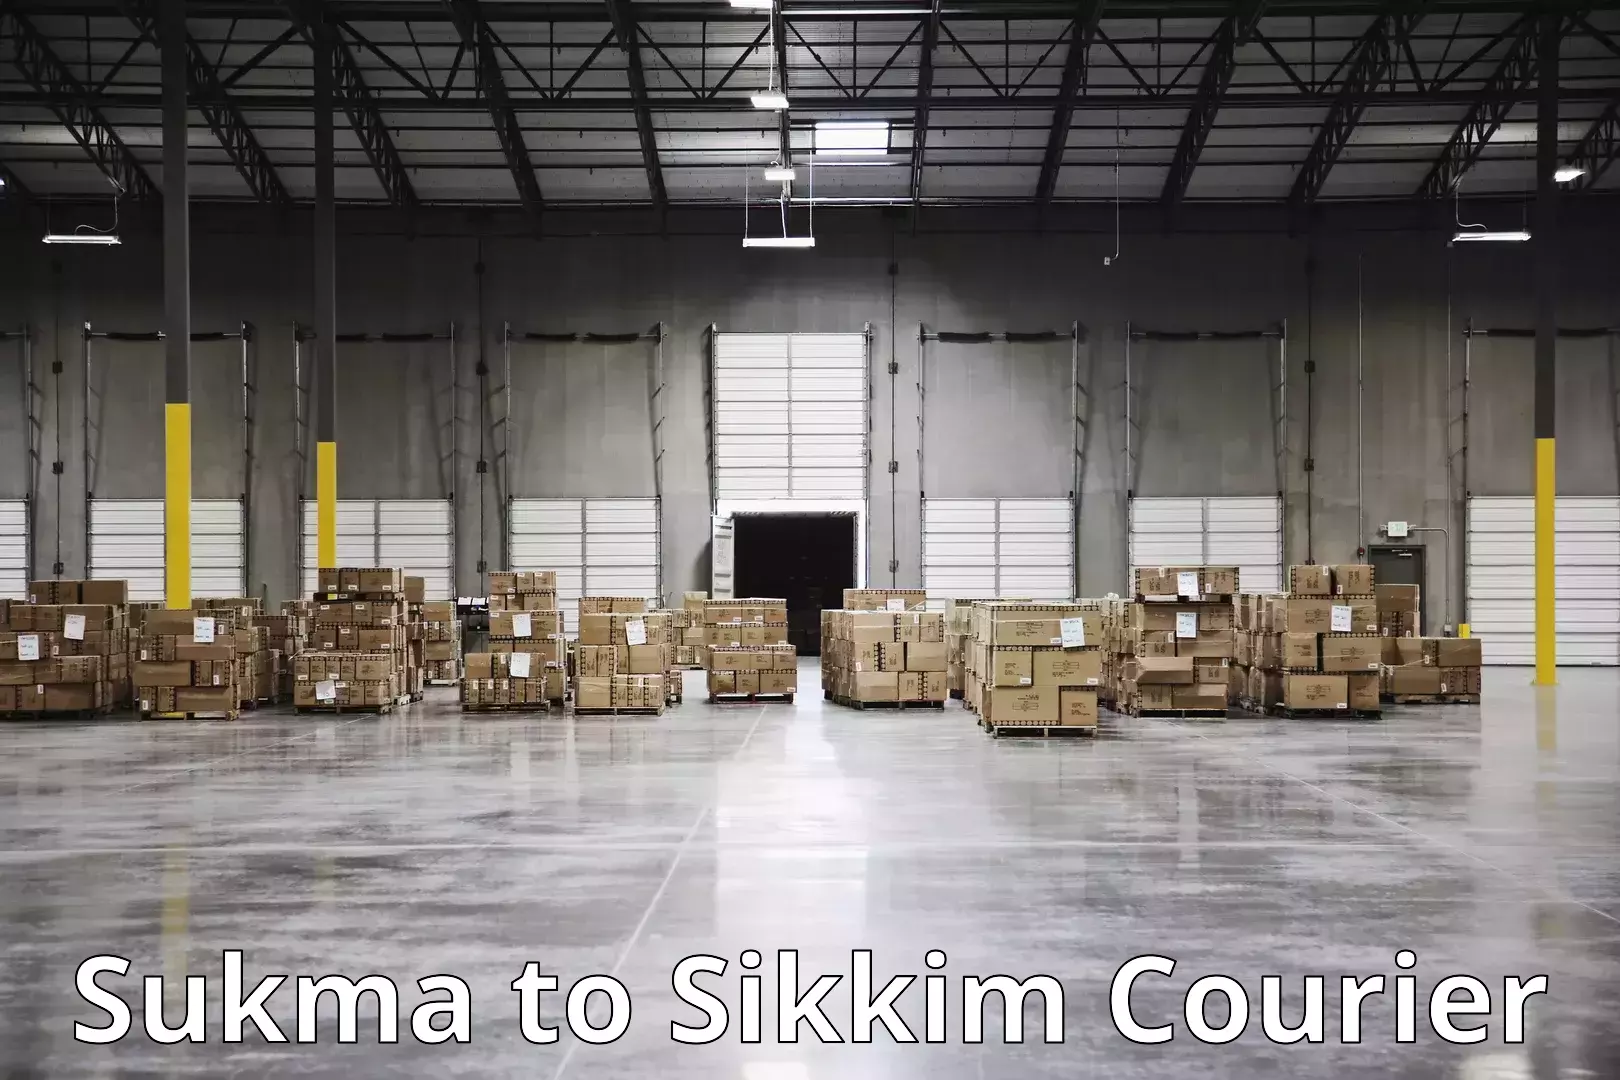 Furniture relocation experts Sukma to Sikkim